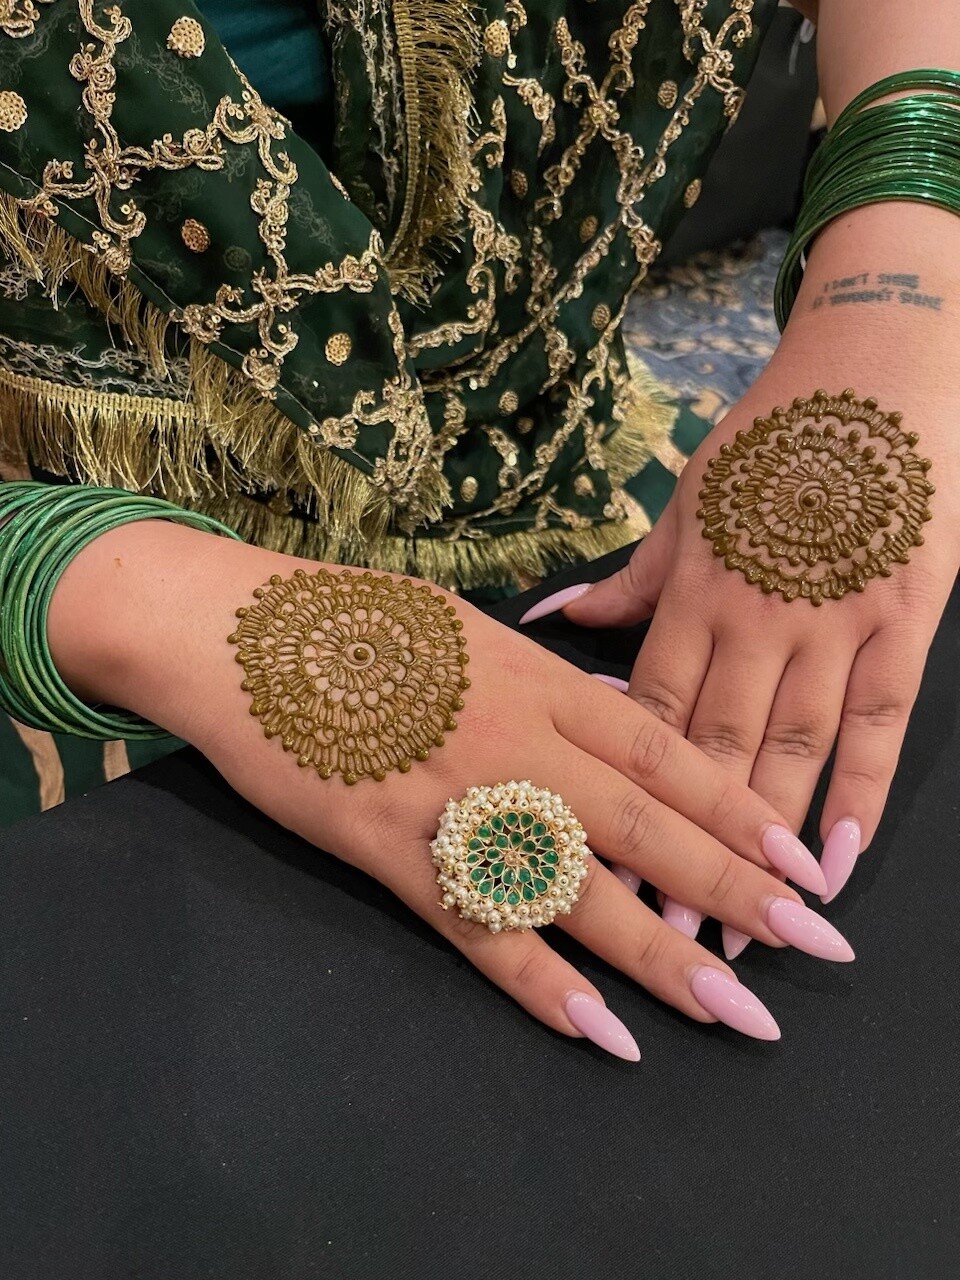 Add a henna artist to your existing order